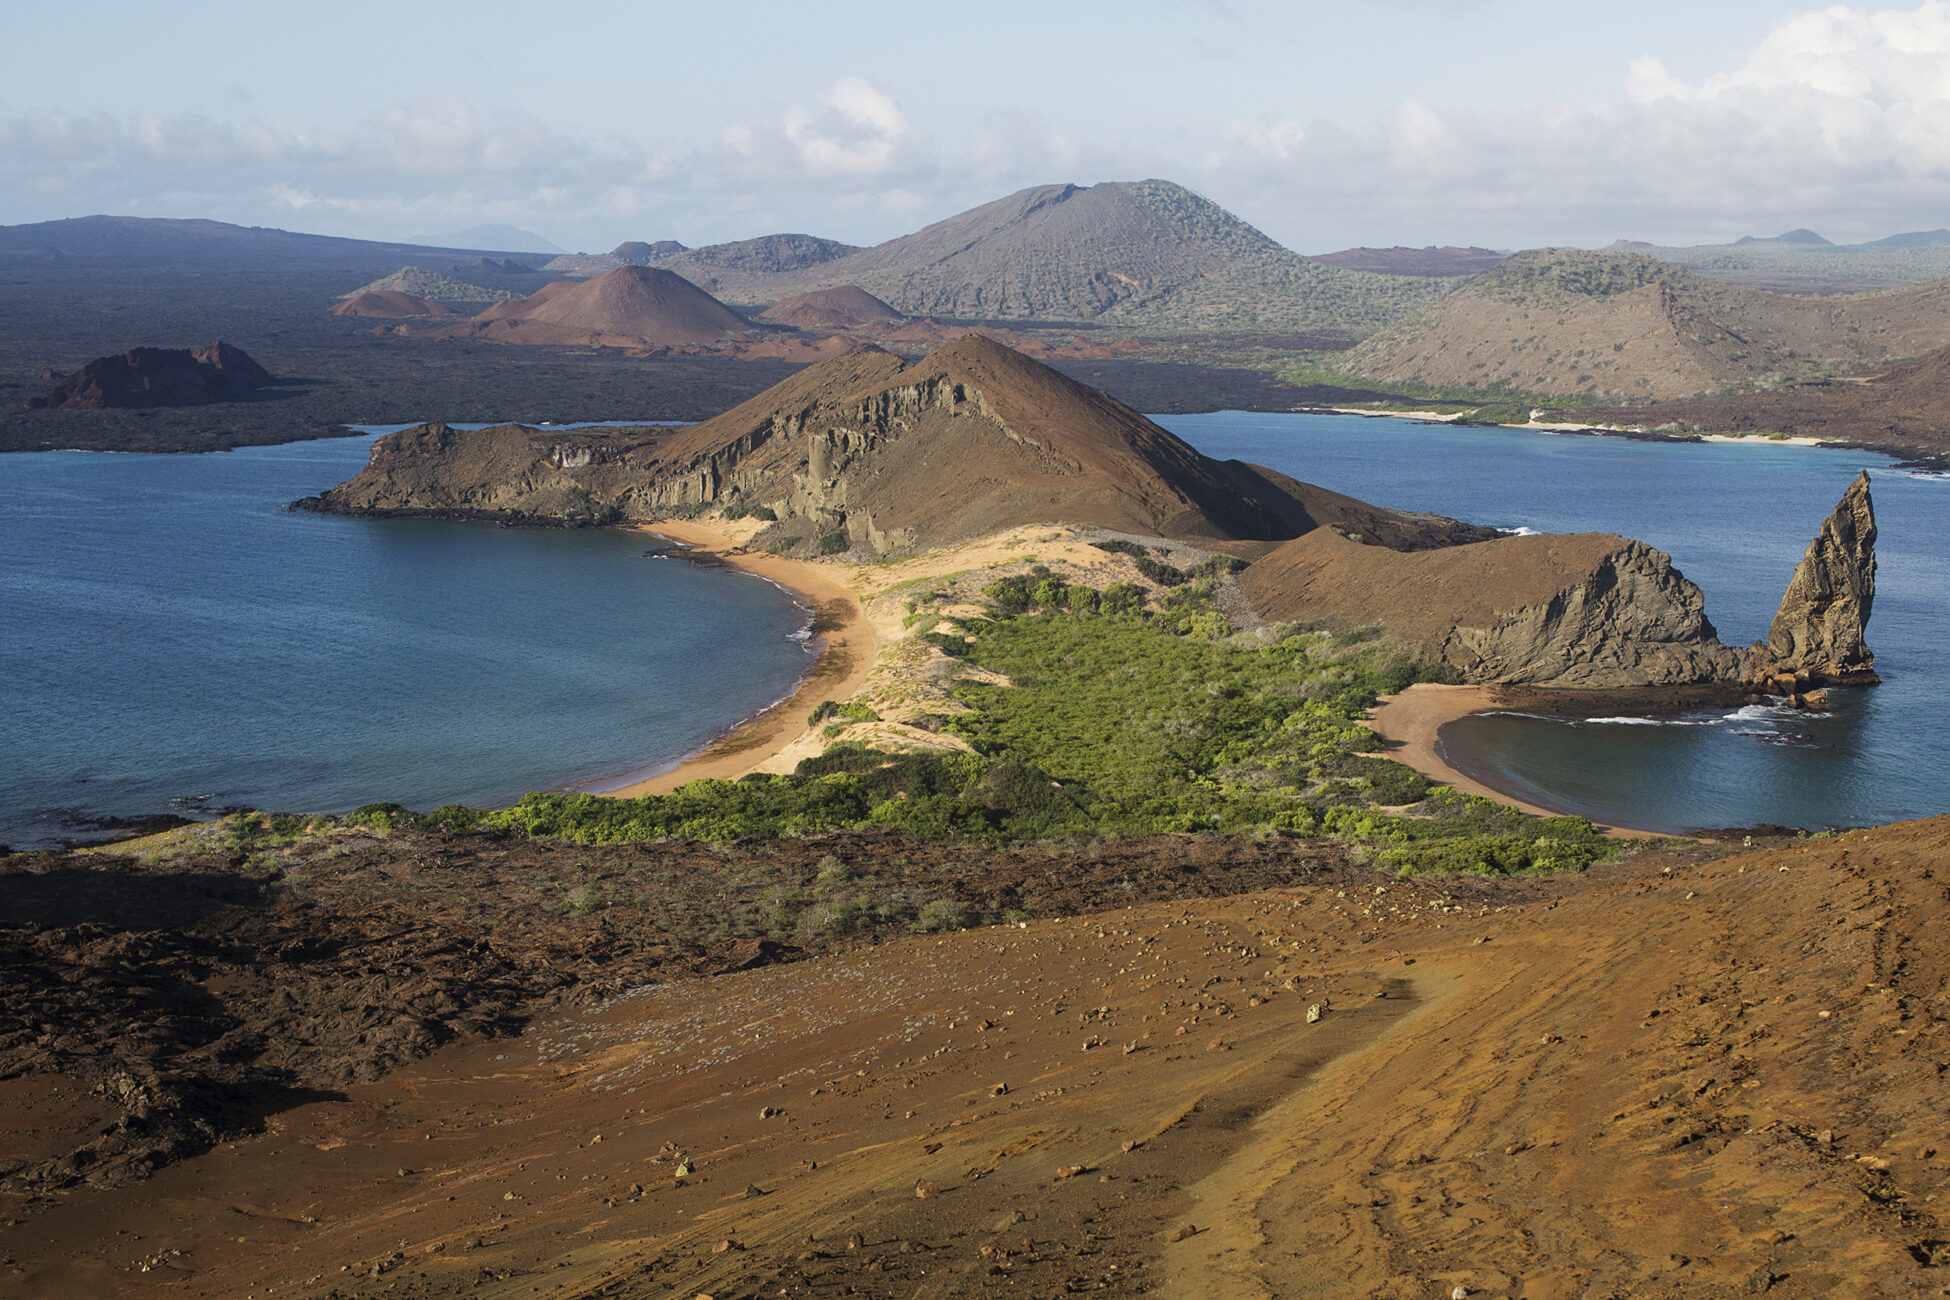 Bartolome Island is one of the most frequently visited sites in the Galapagos archipelago. (photo by Megan May). Photo is a wide angle view of the island, with mountains and the ocean.